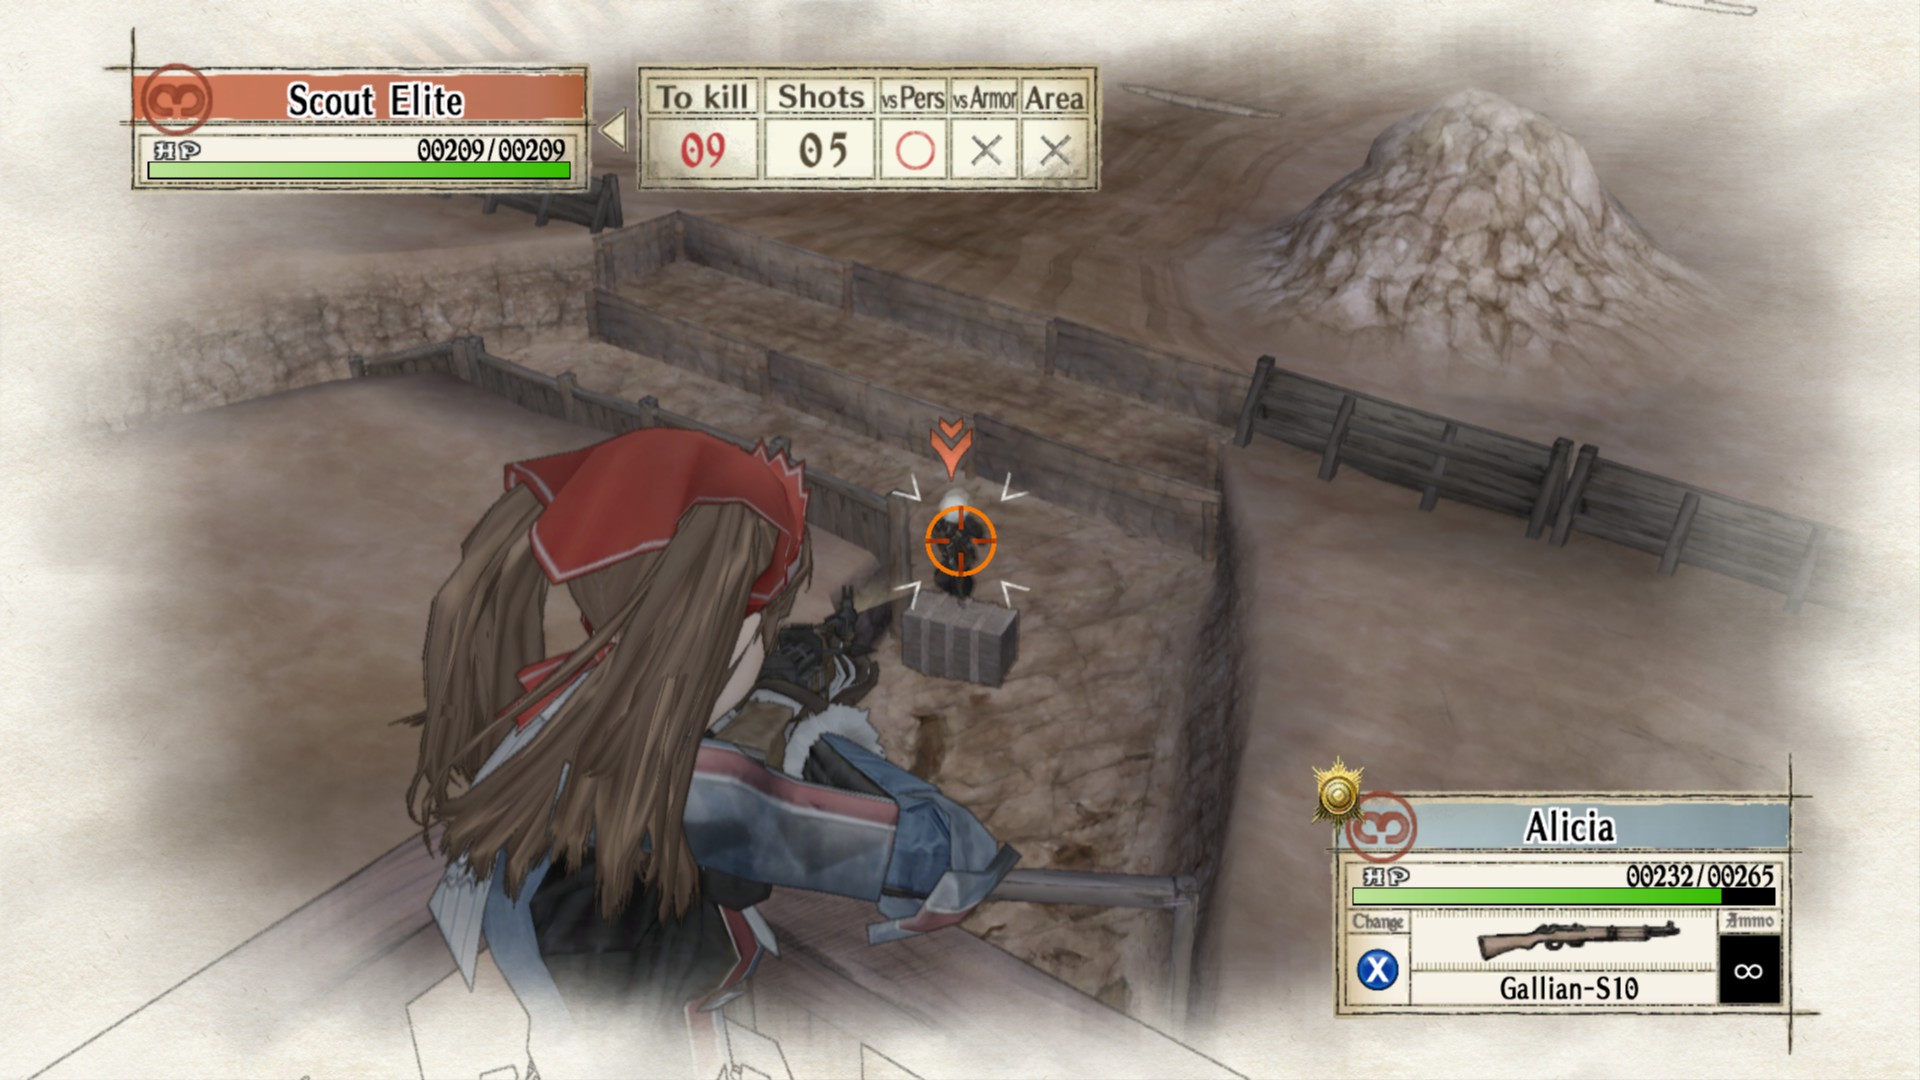 [Game PC] Valkyria Chronicles - CODEX [Action / RPG | 2014]